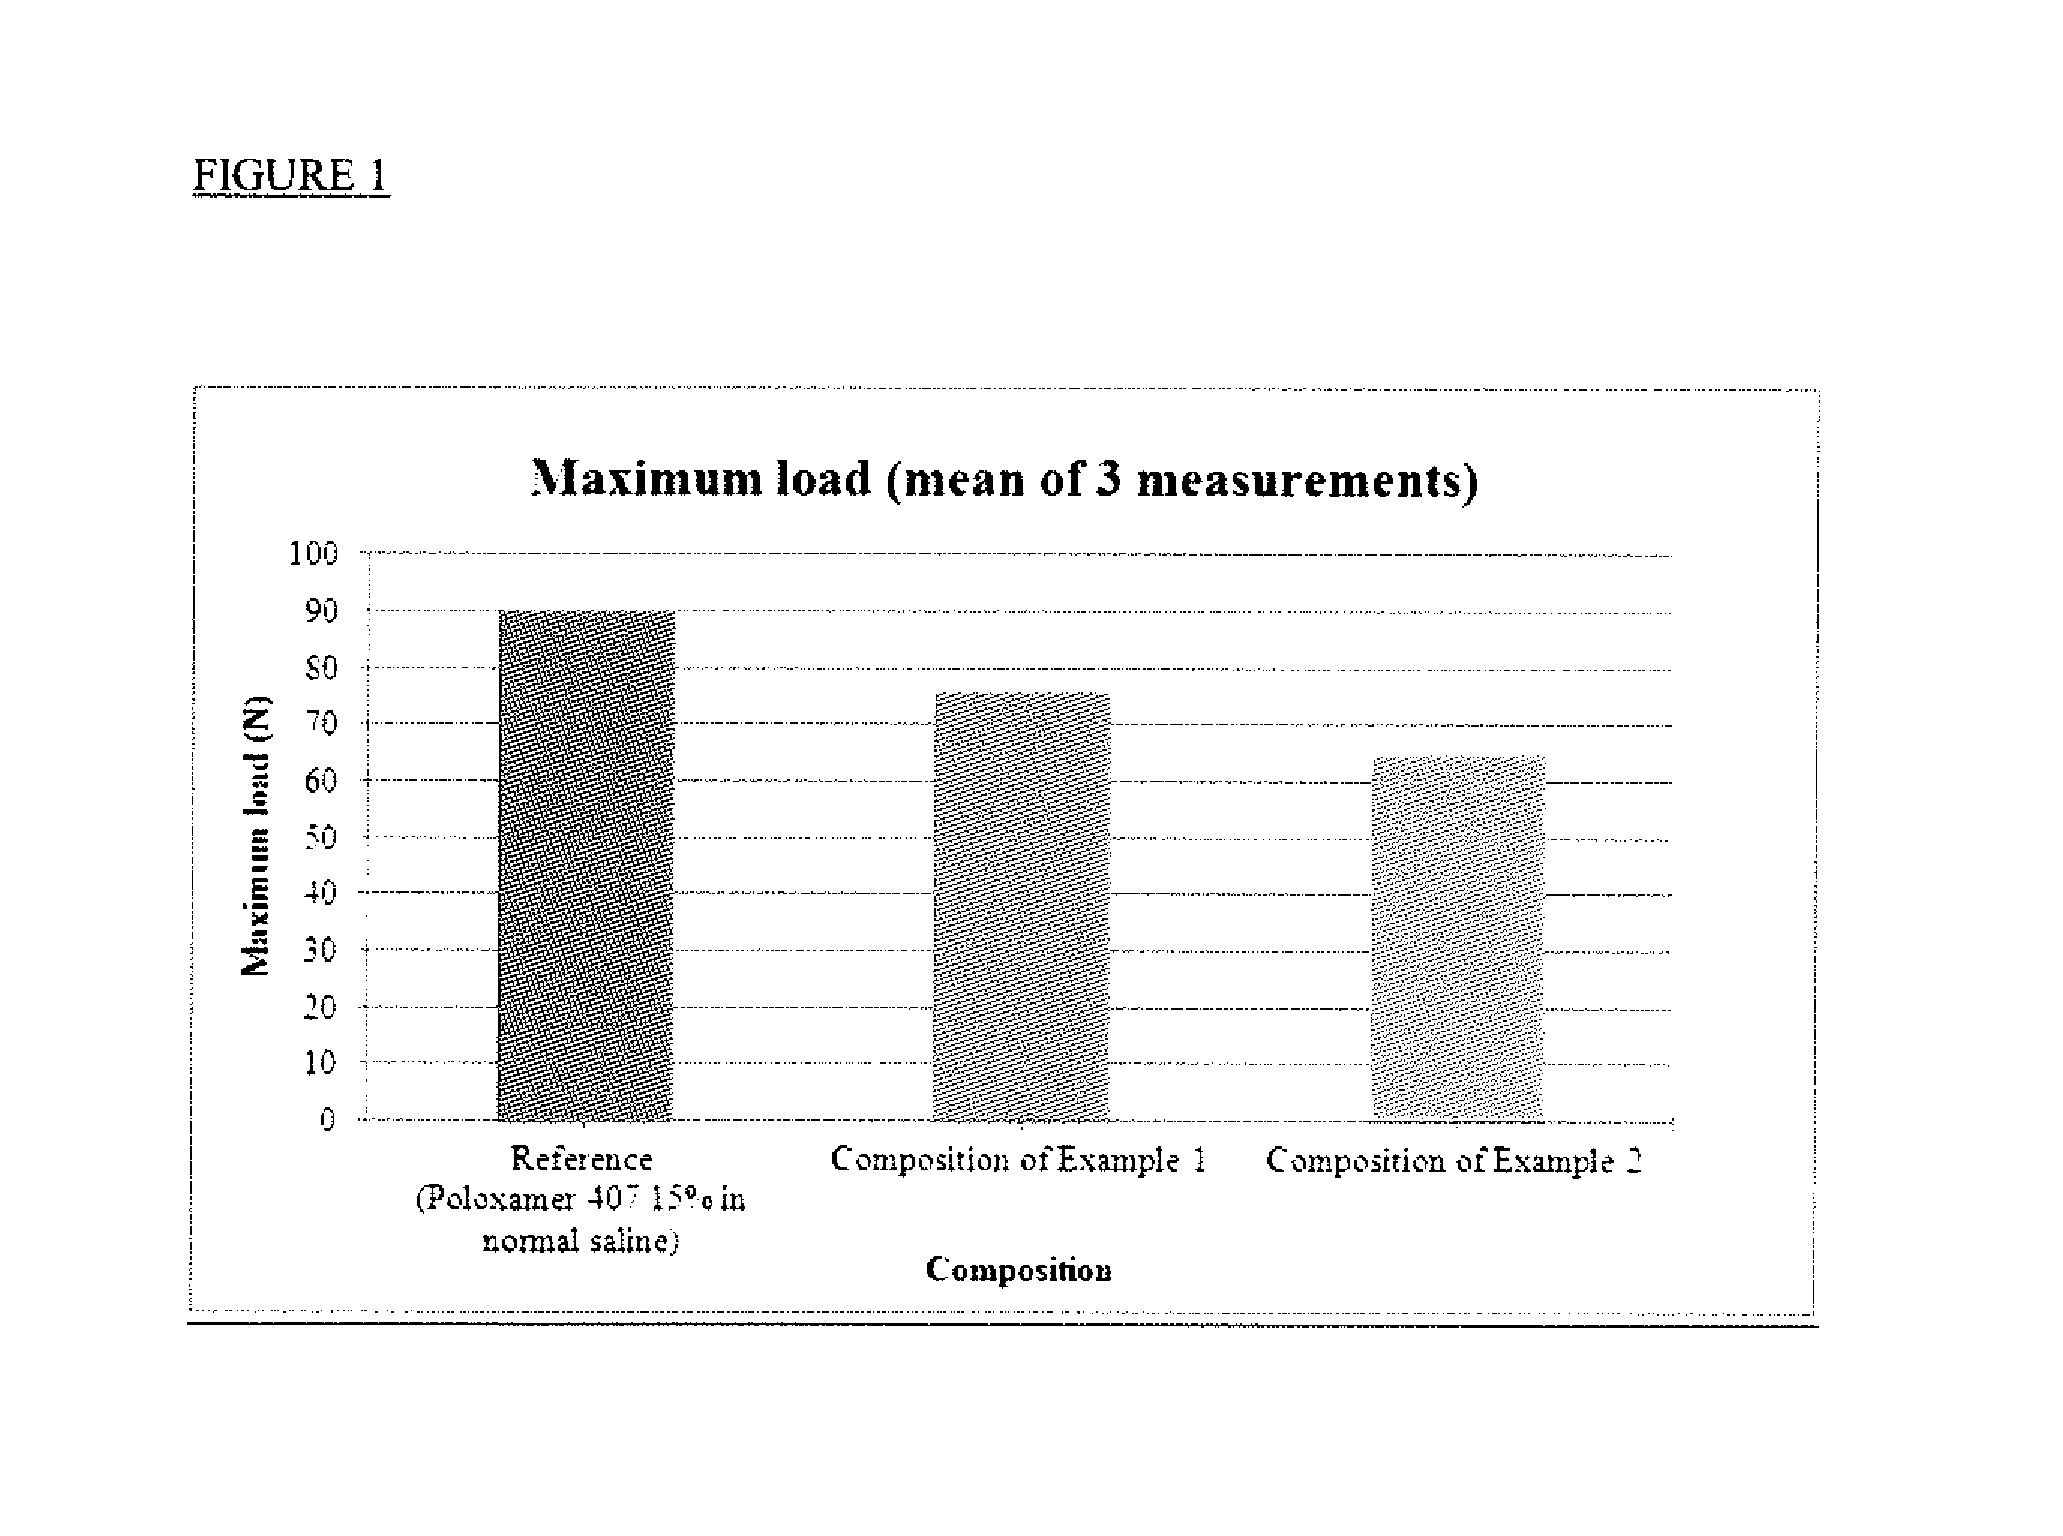 Emulsions or microemulsions for use in endoscopic mucosal resectioning and/or endoscopic submucosal dissection